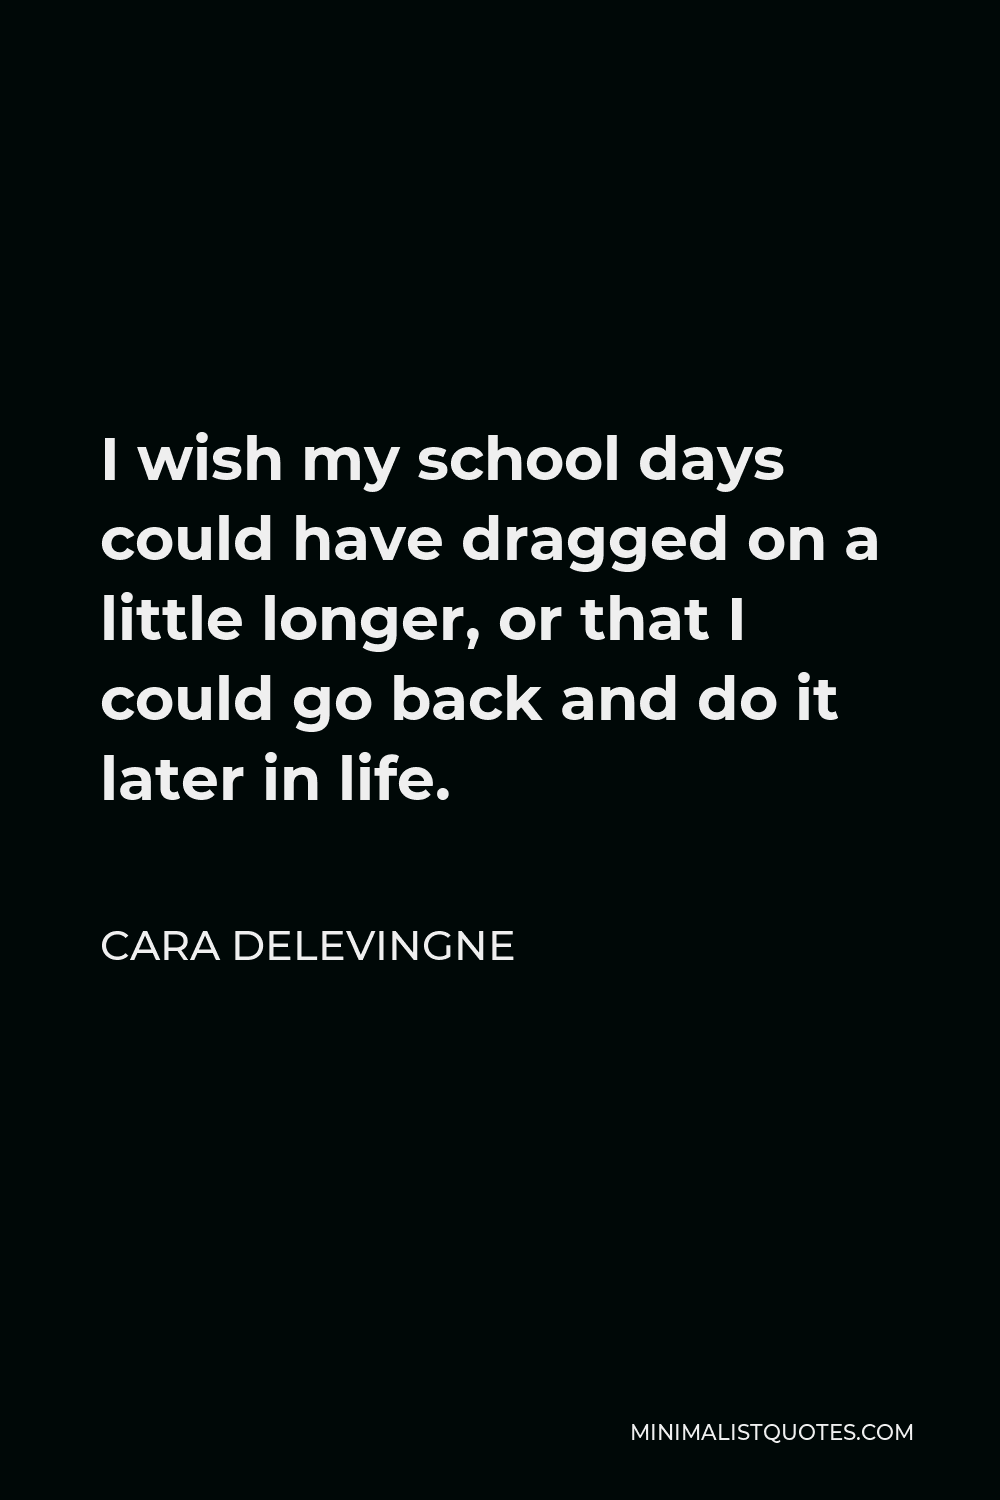 Cara Delevingne Quote - I wish my school days could have dragged on a little longer, or that I could go back and do it later in life.